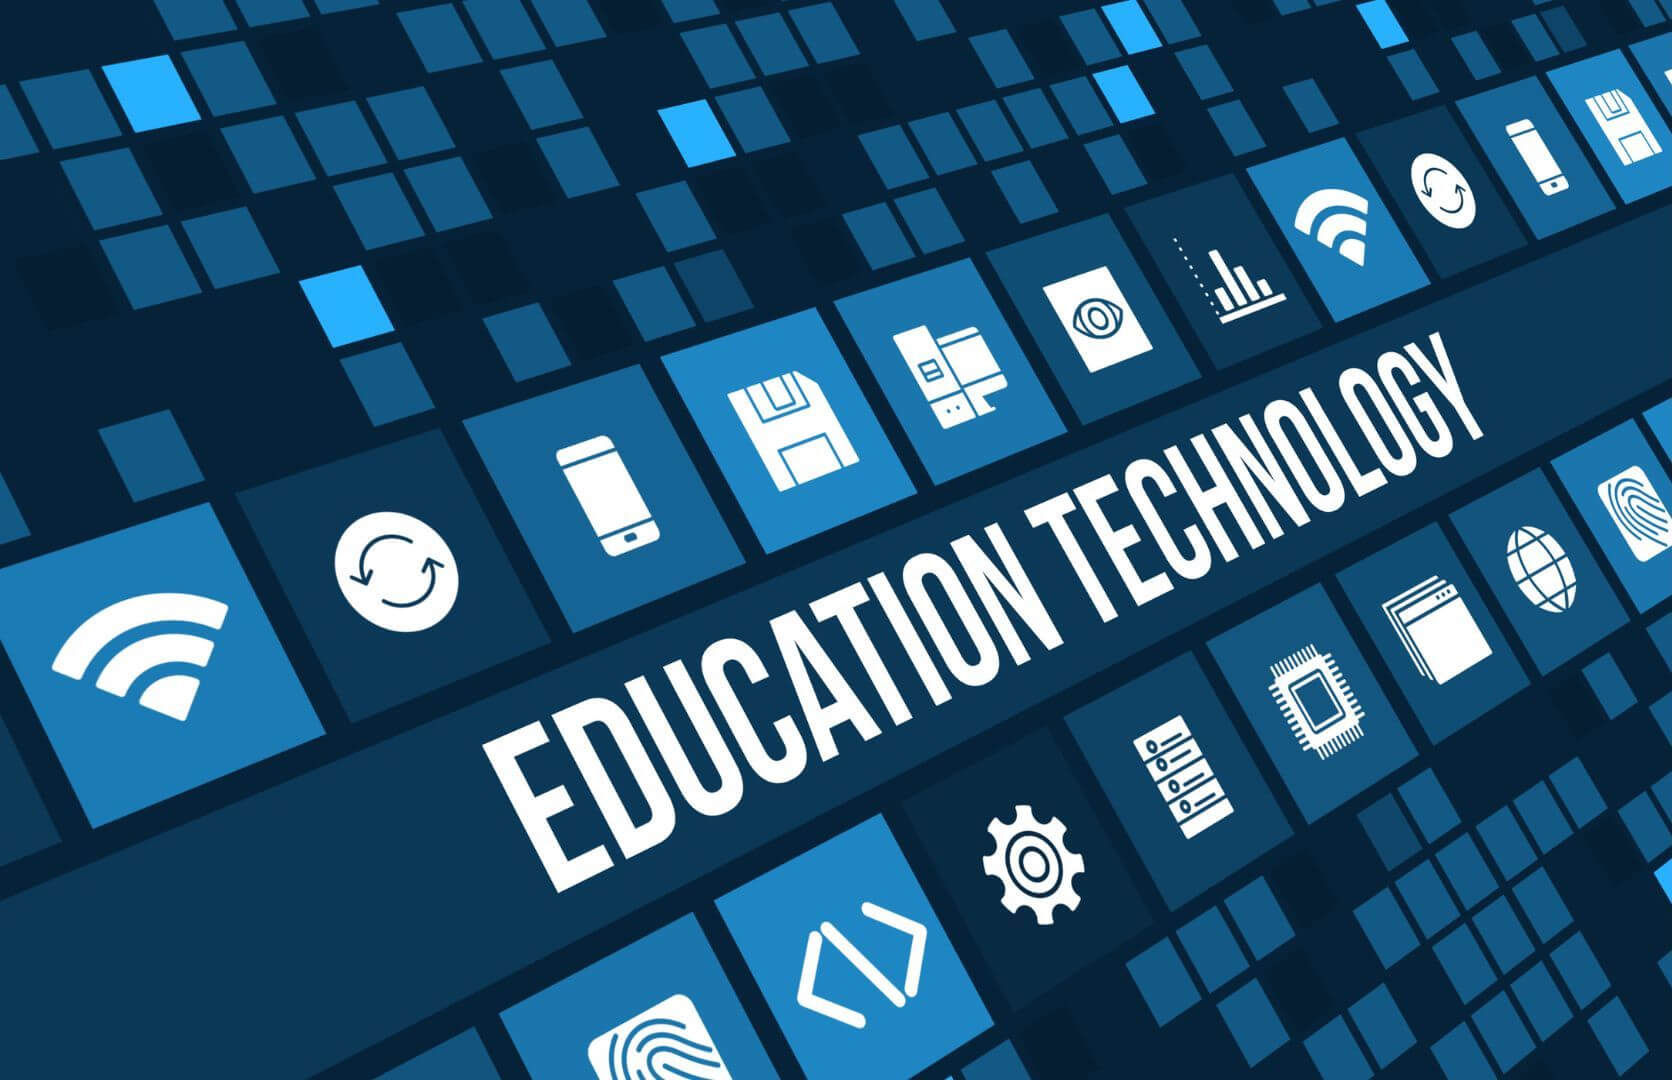 Featured Image for “Edtech that is changing education for the better”